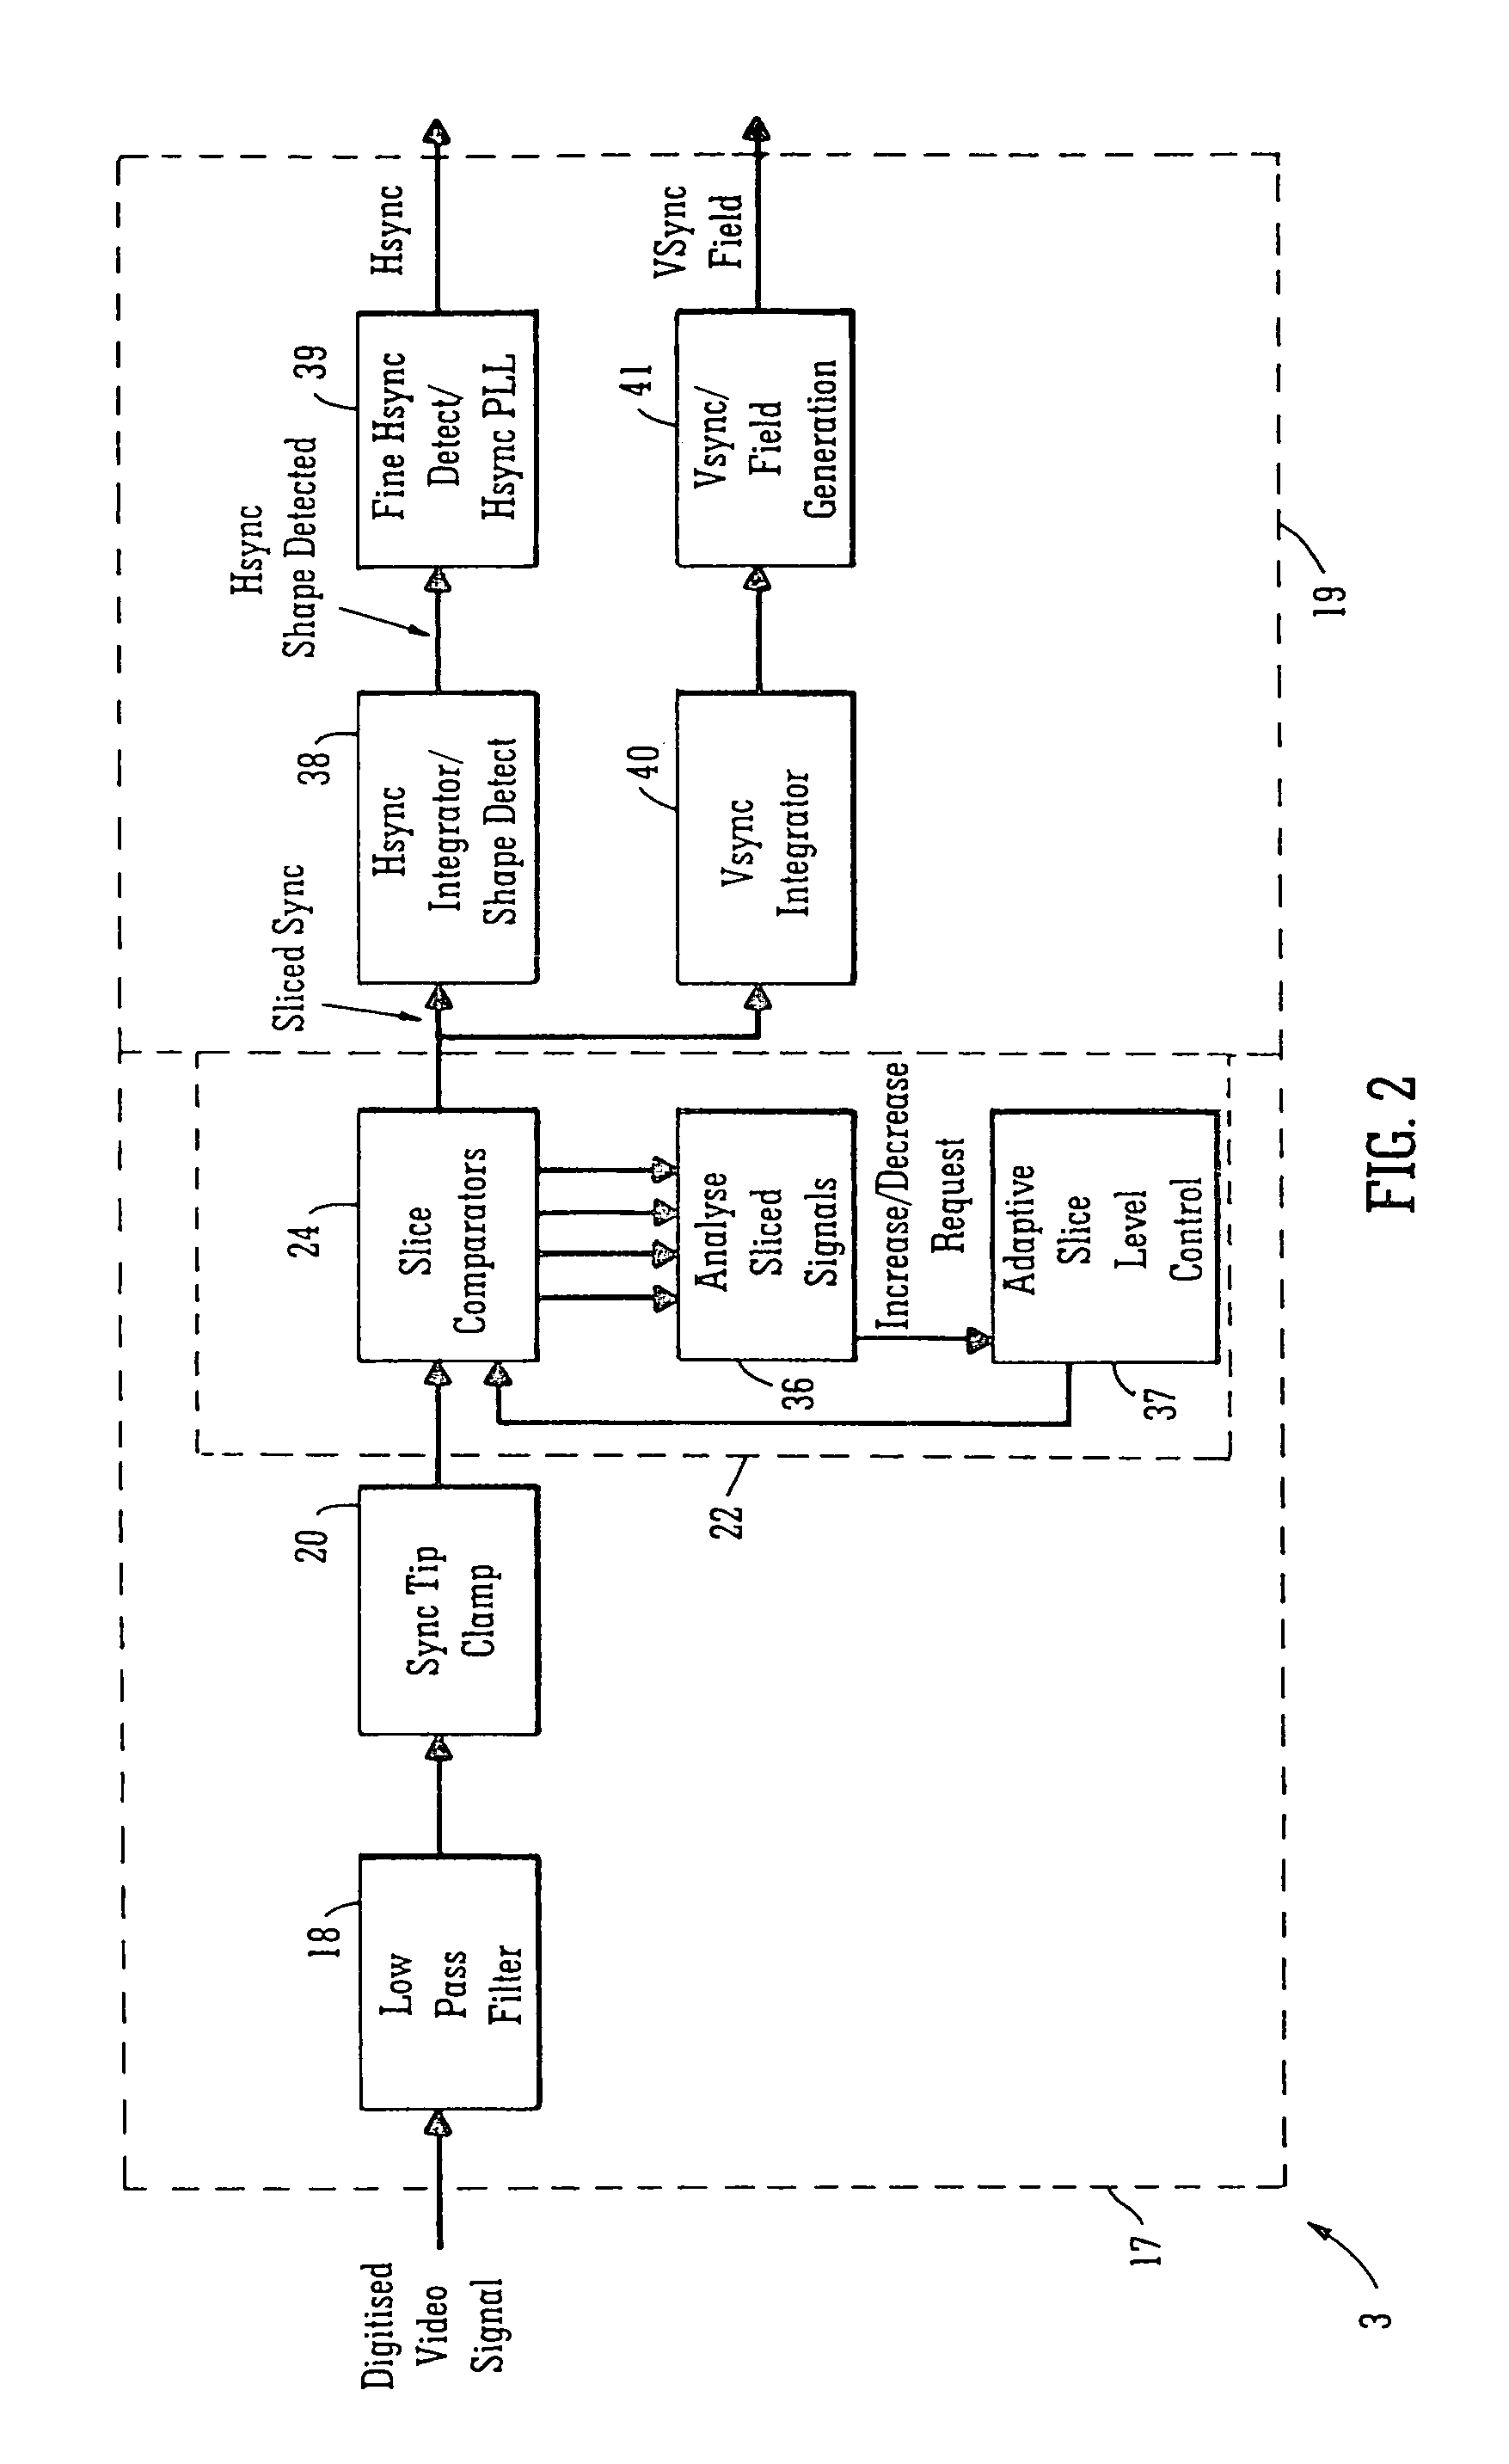 Method and a circuit for deriving a synchronisation signal from a video signal